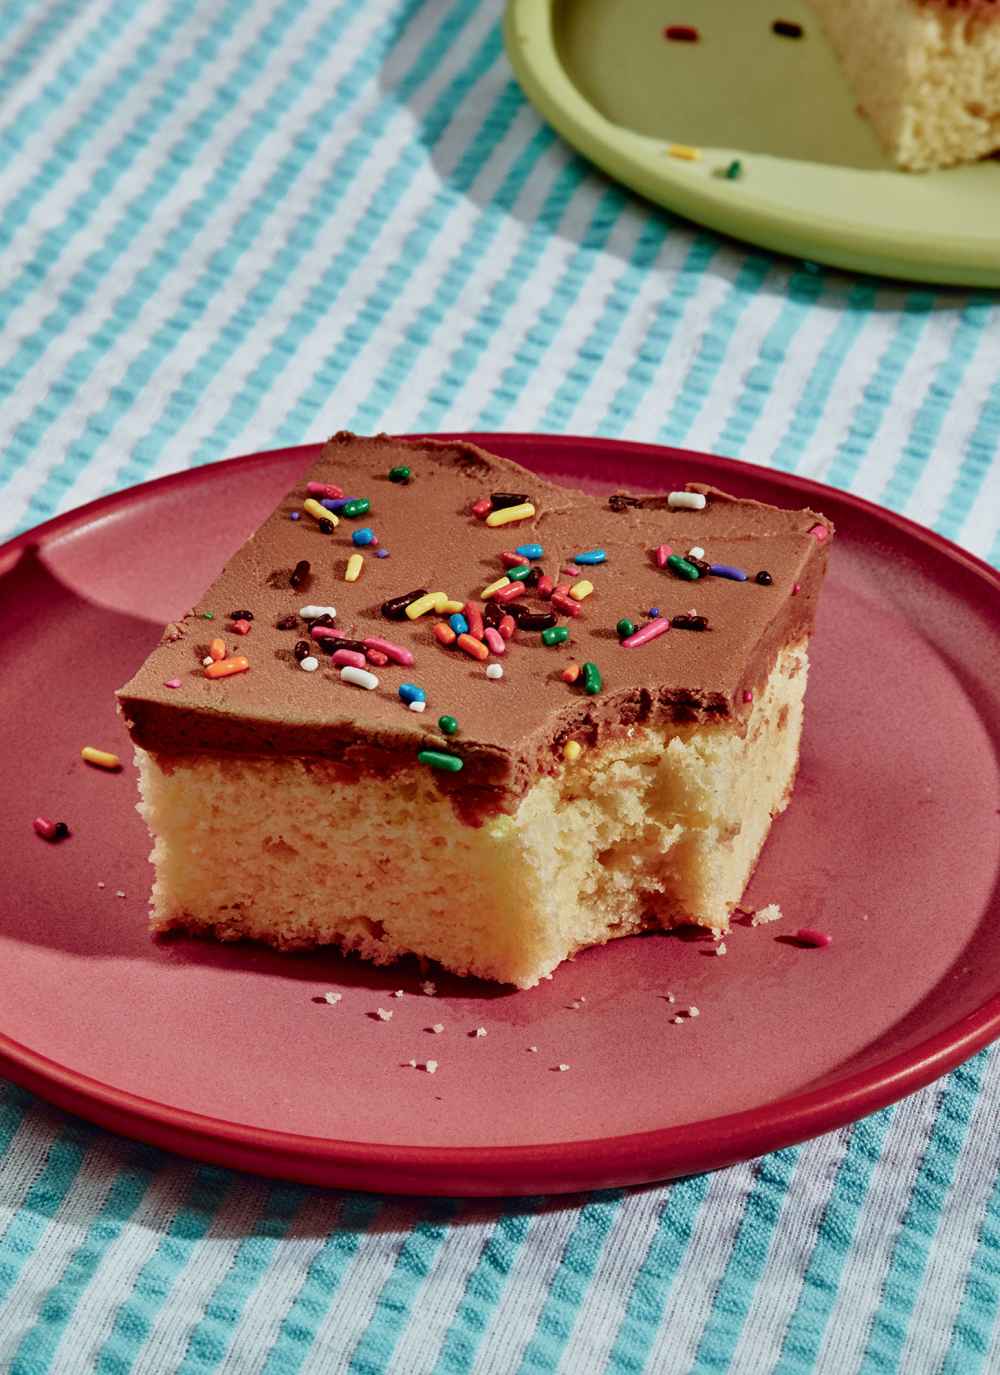 Chrissy Teigen Shares Her Recipe for the Perfect Lazy and Tasty Sheet Cake